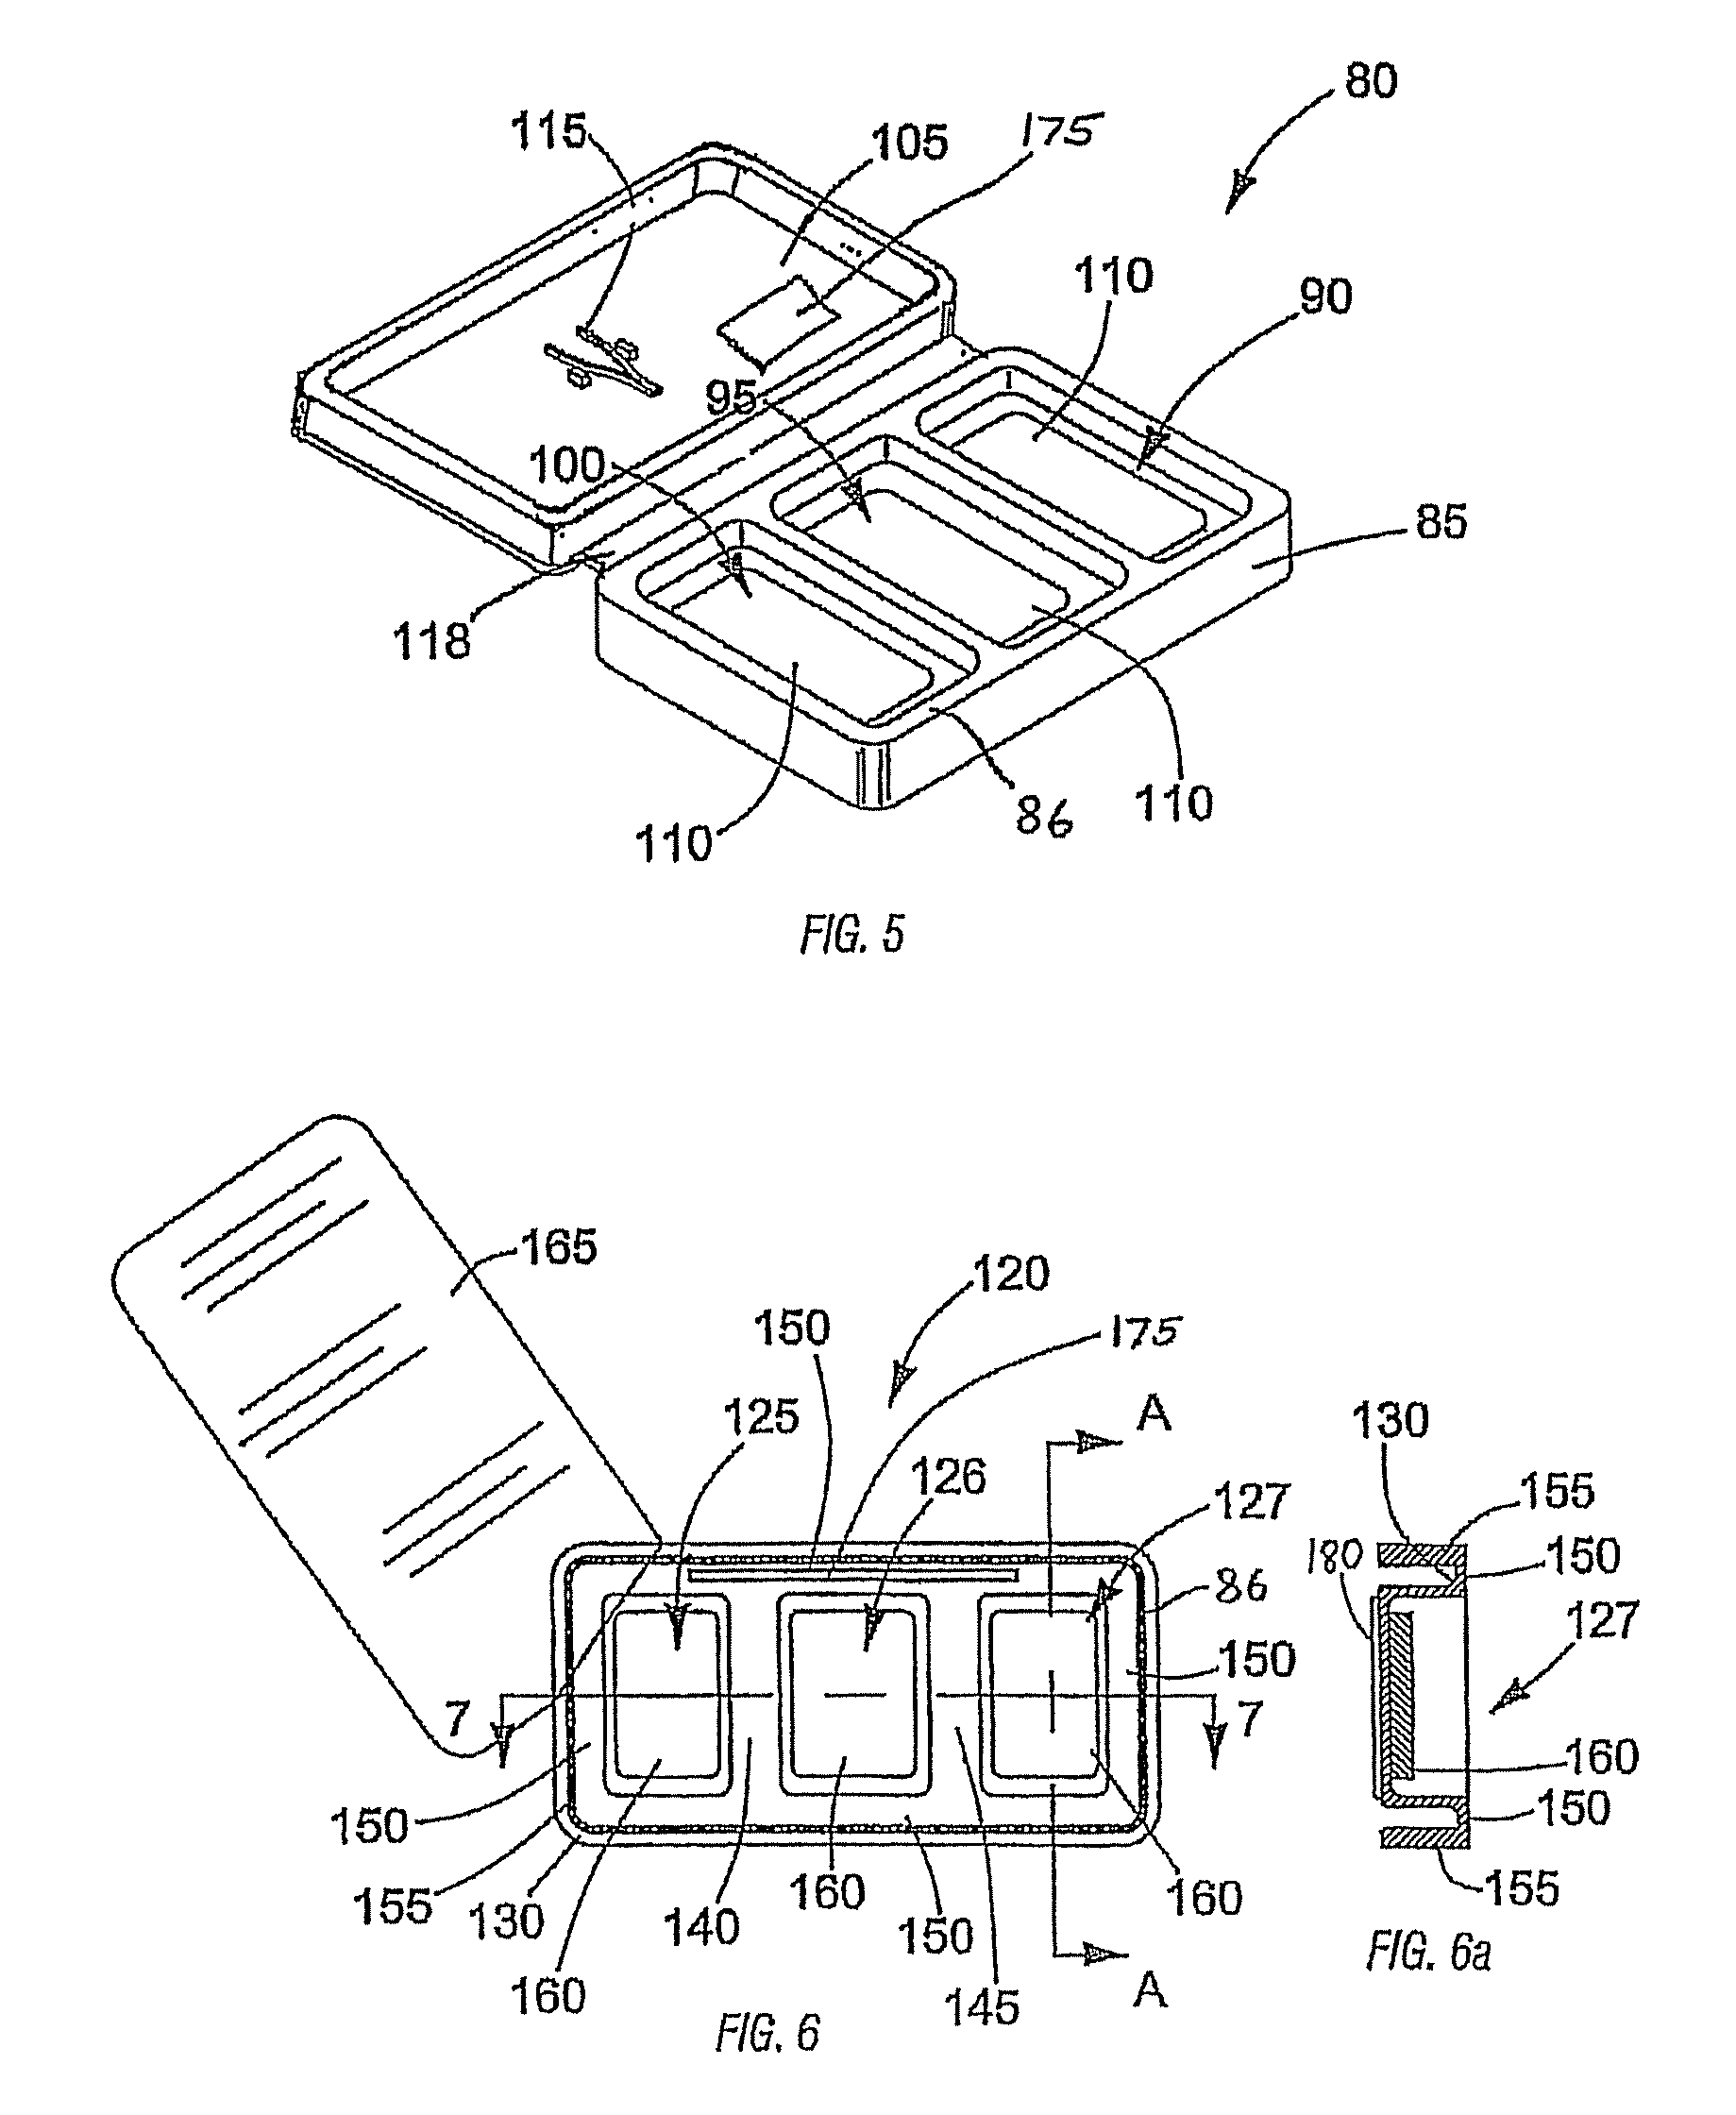 Method of identifying the orientation of a tissue sample